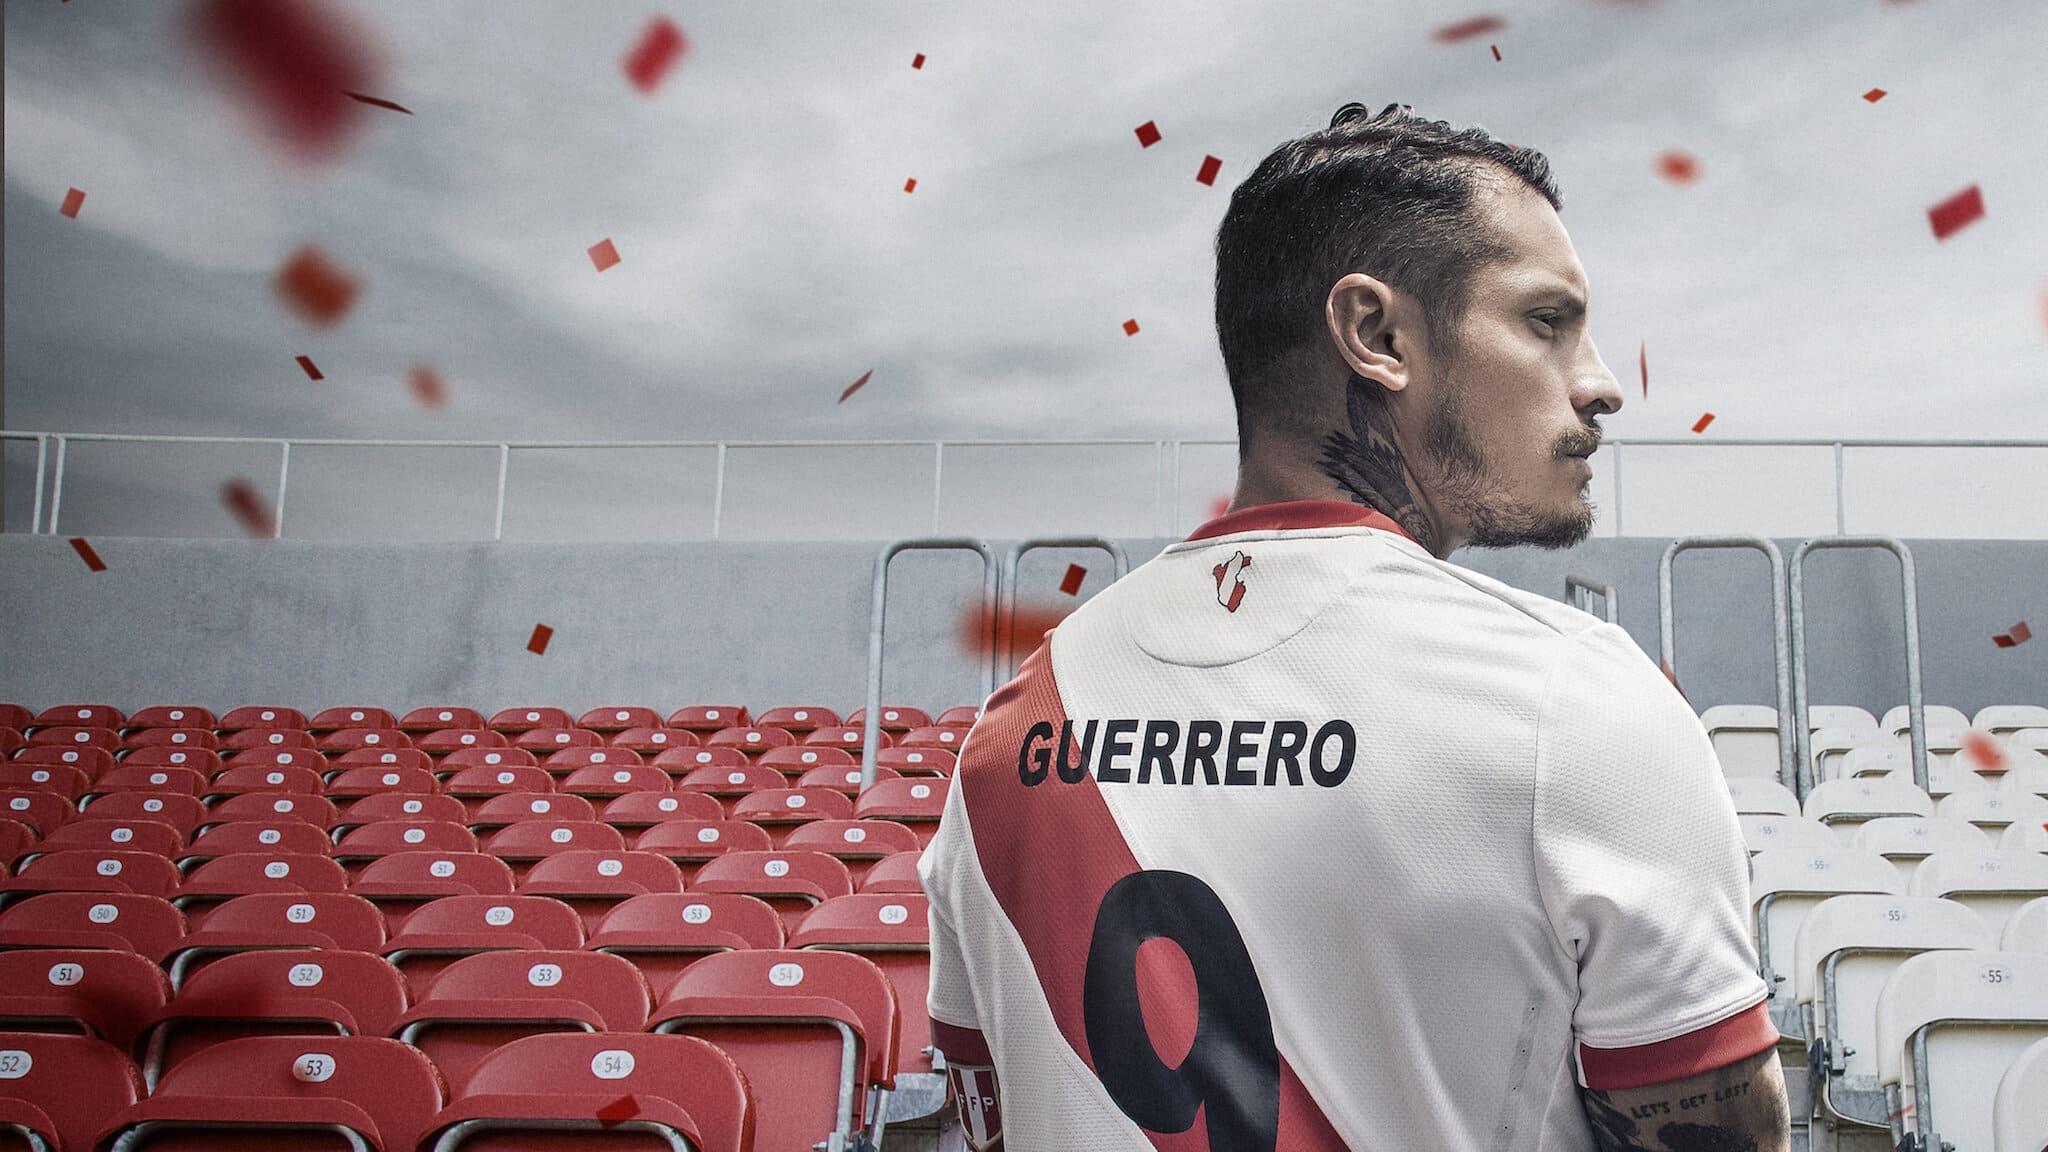 The Fight for Justice: Paolo Guerrero backdrop